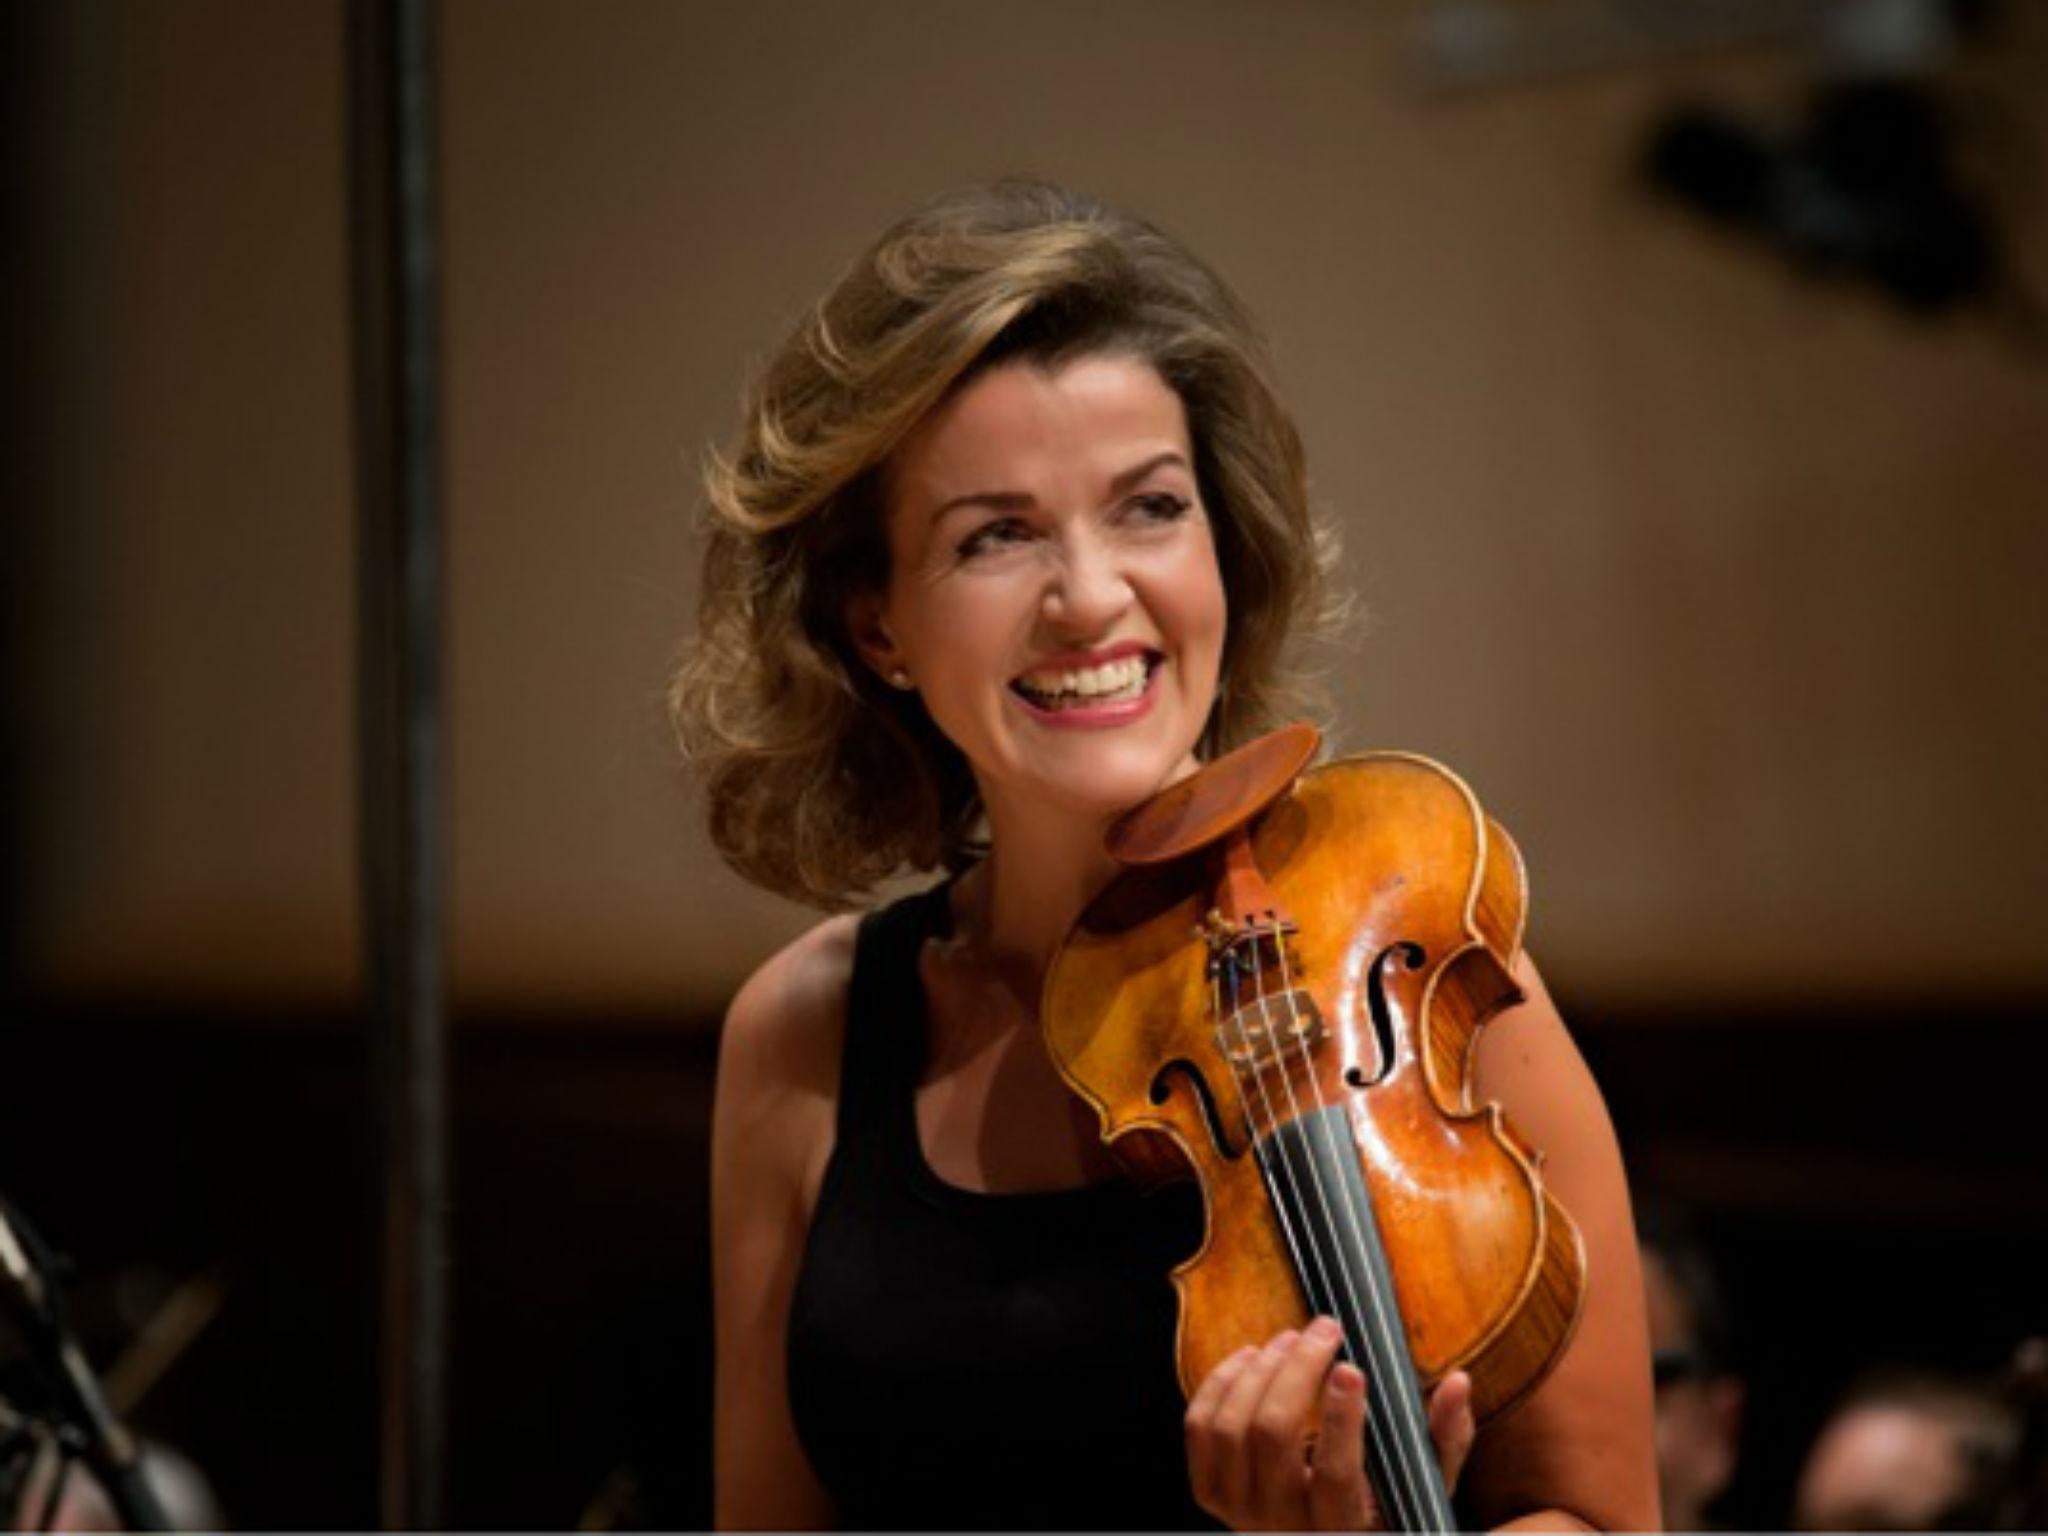 Violinist Anne-Sophie Mutter revealed a more intimate side to her talents at a recital at the Barbican